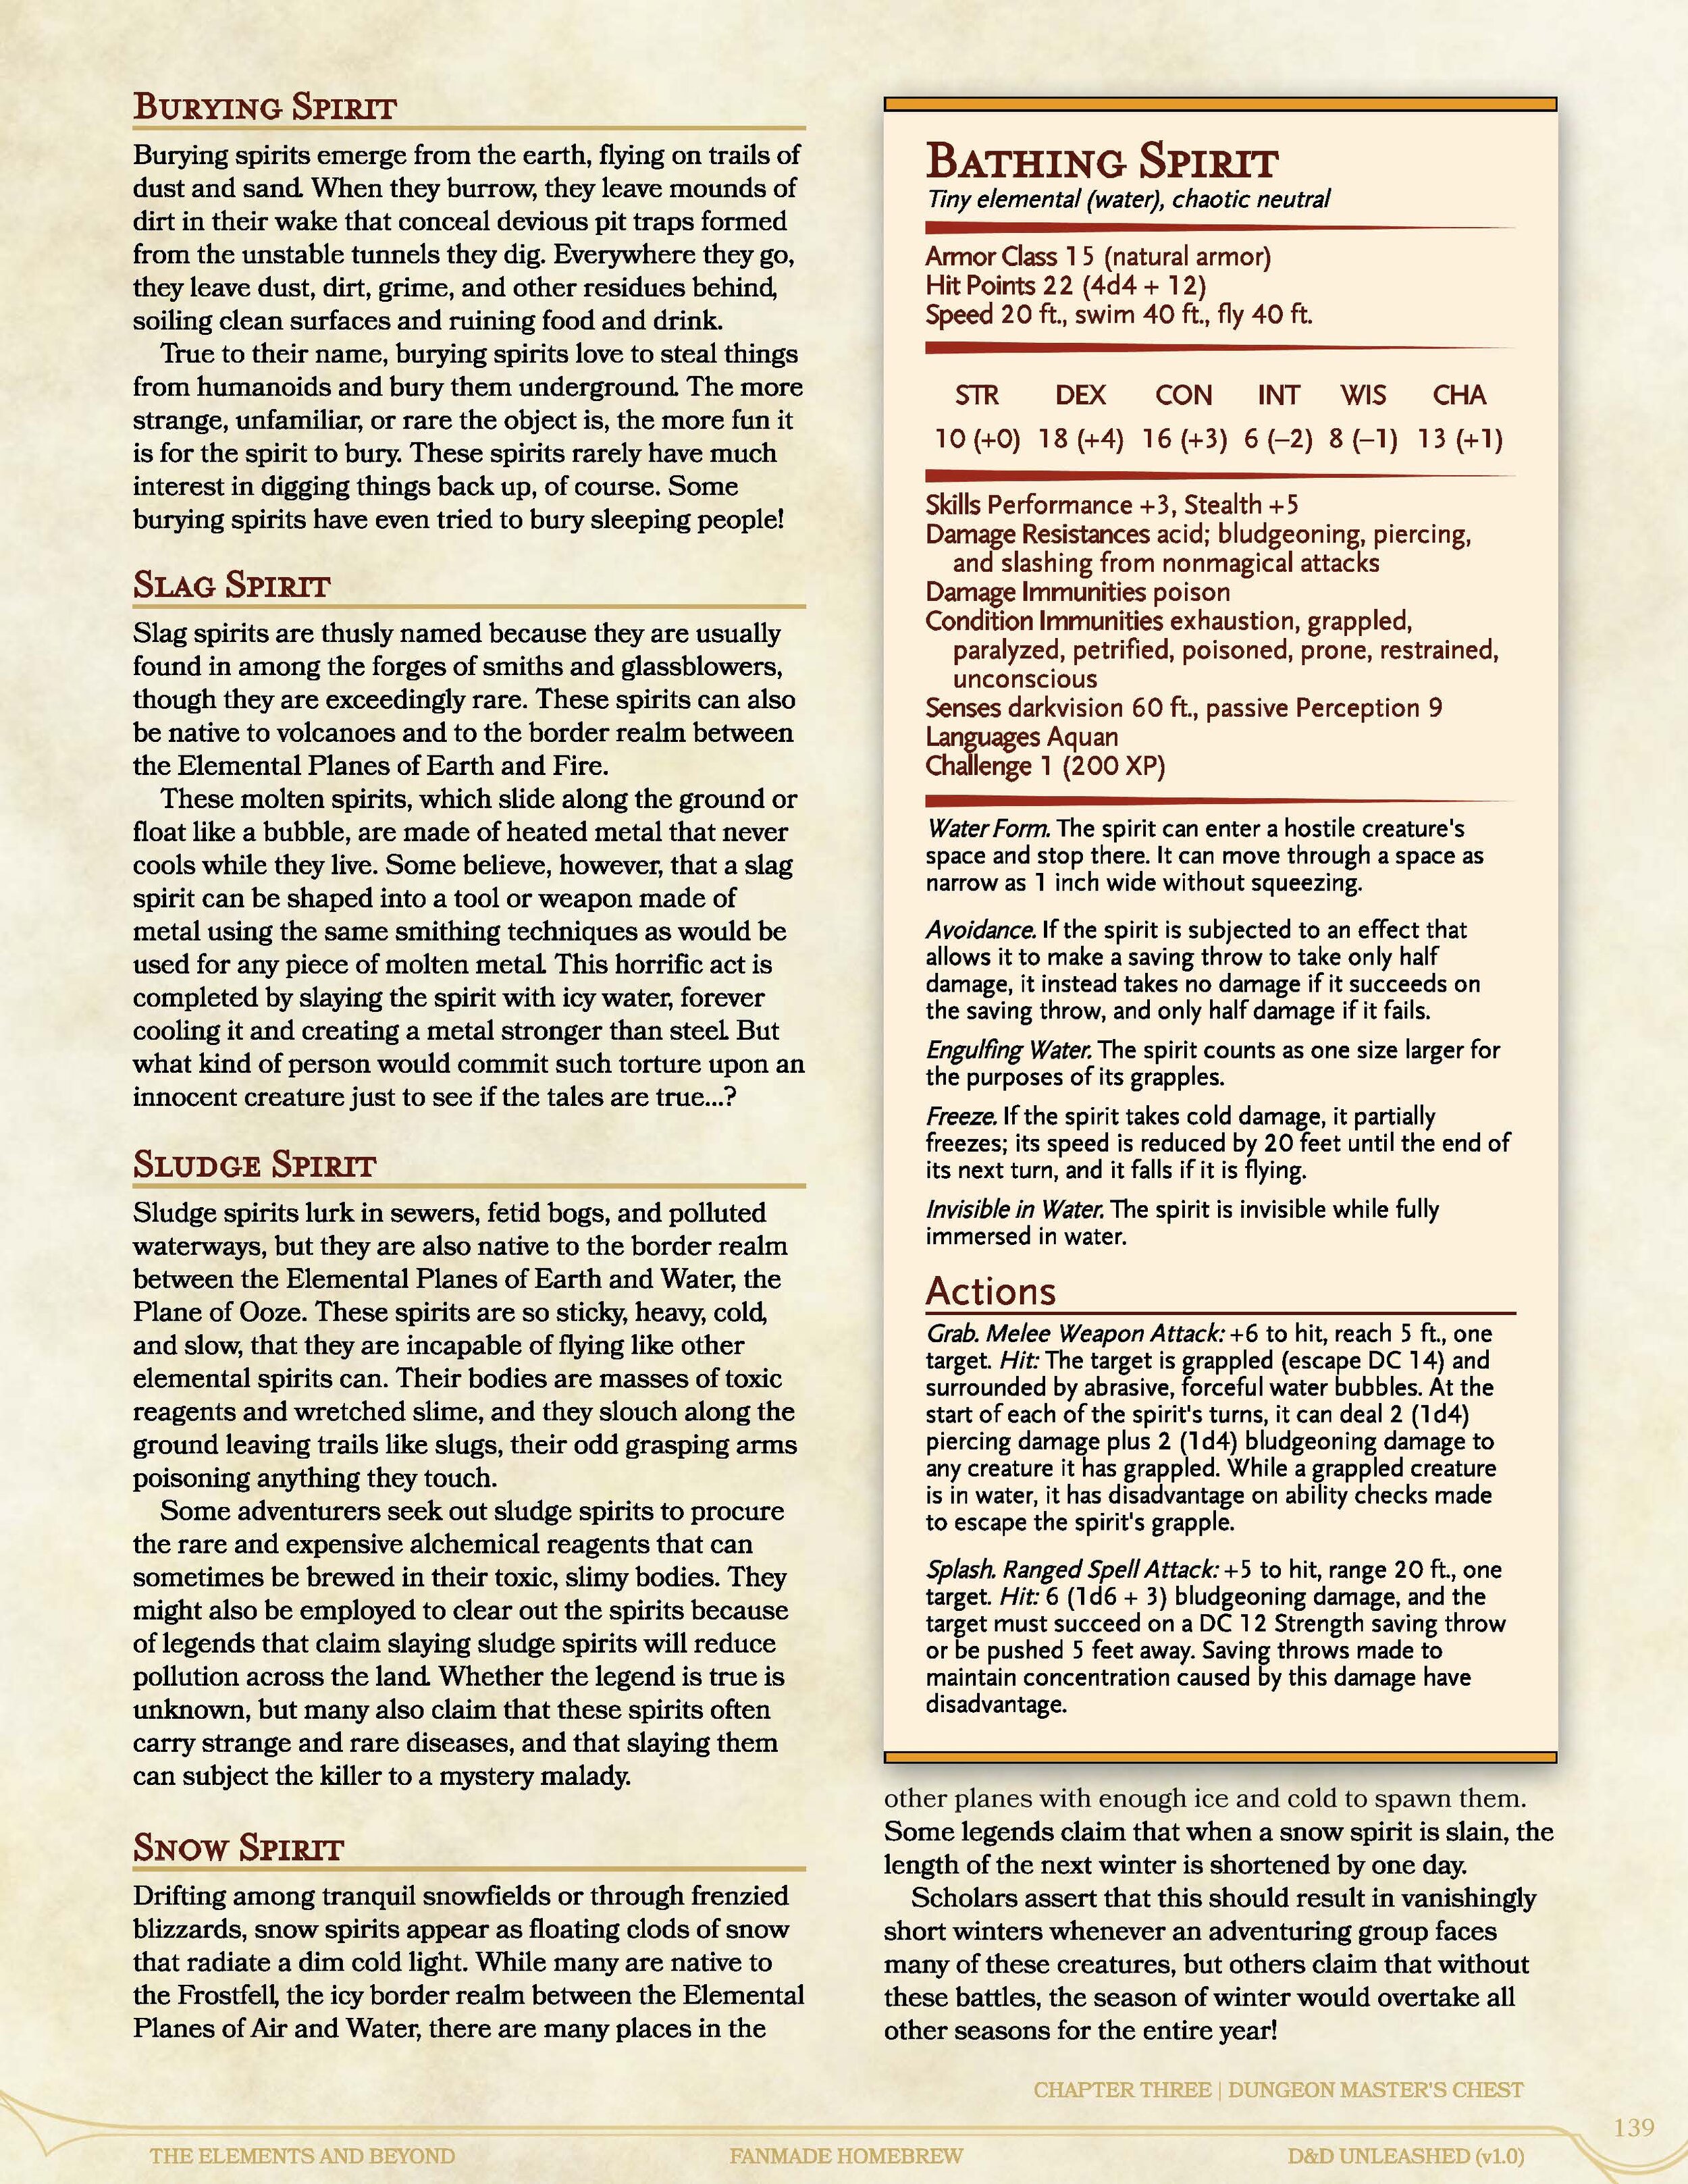 D&D Unleashed Compendium -- The Elements and Beyond (v1p0)_Page_139.jpg